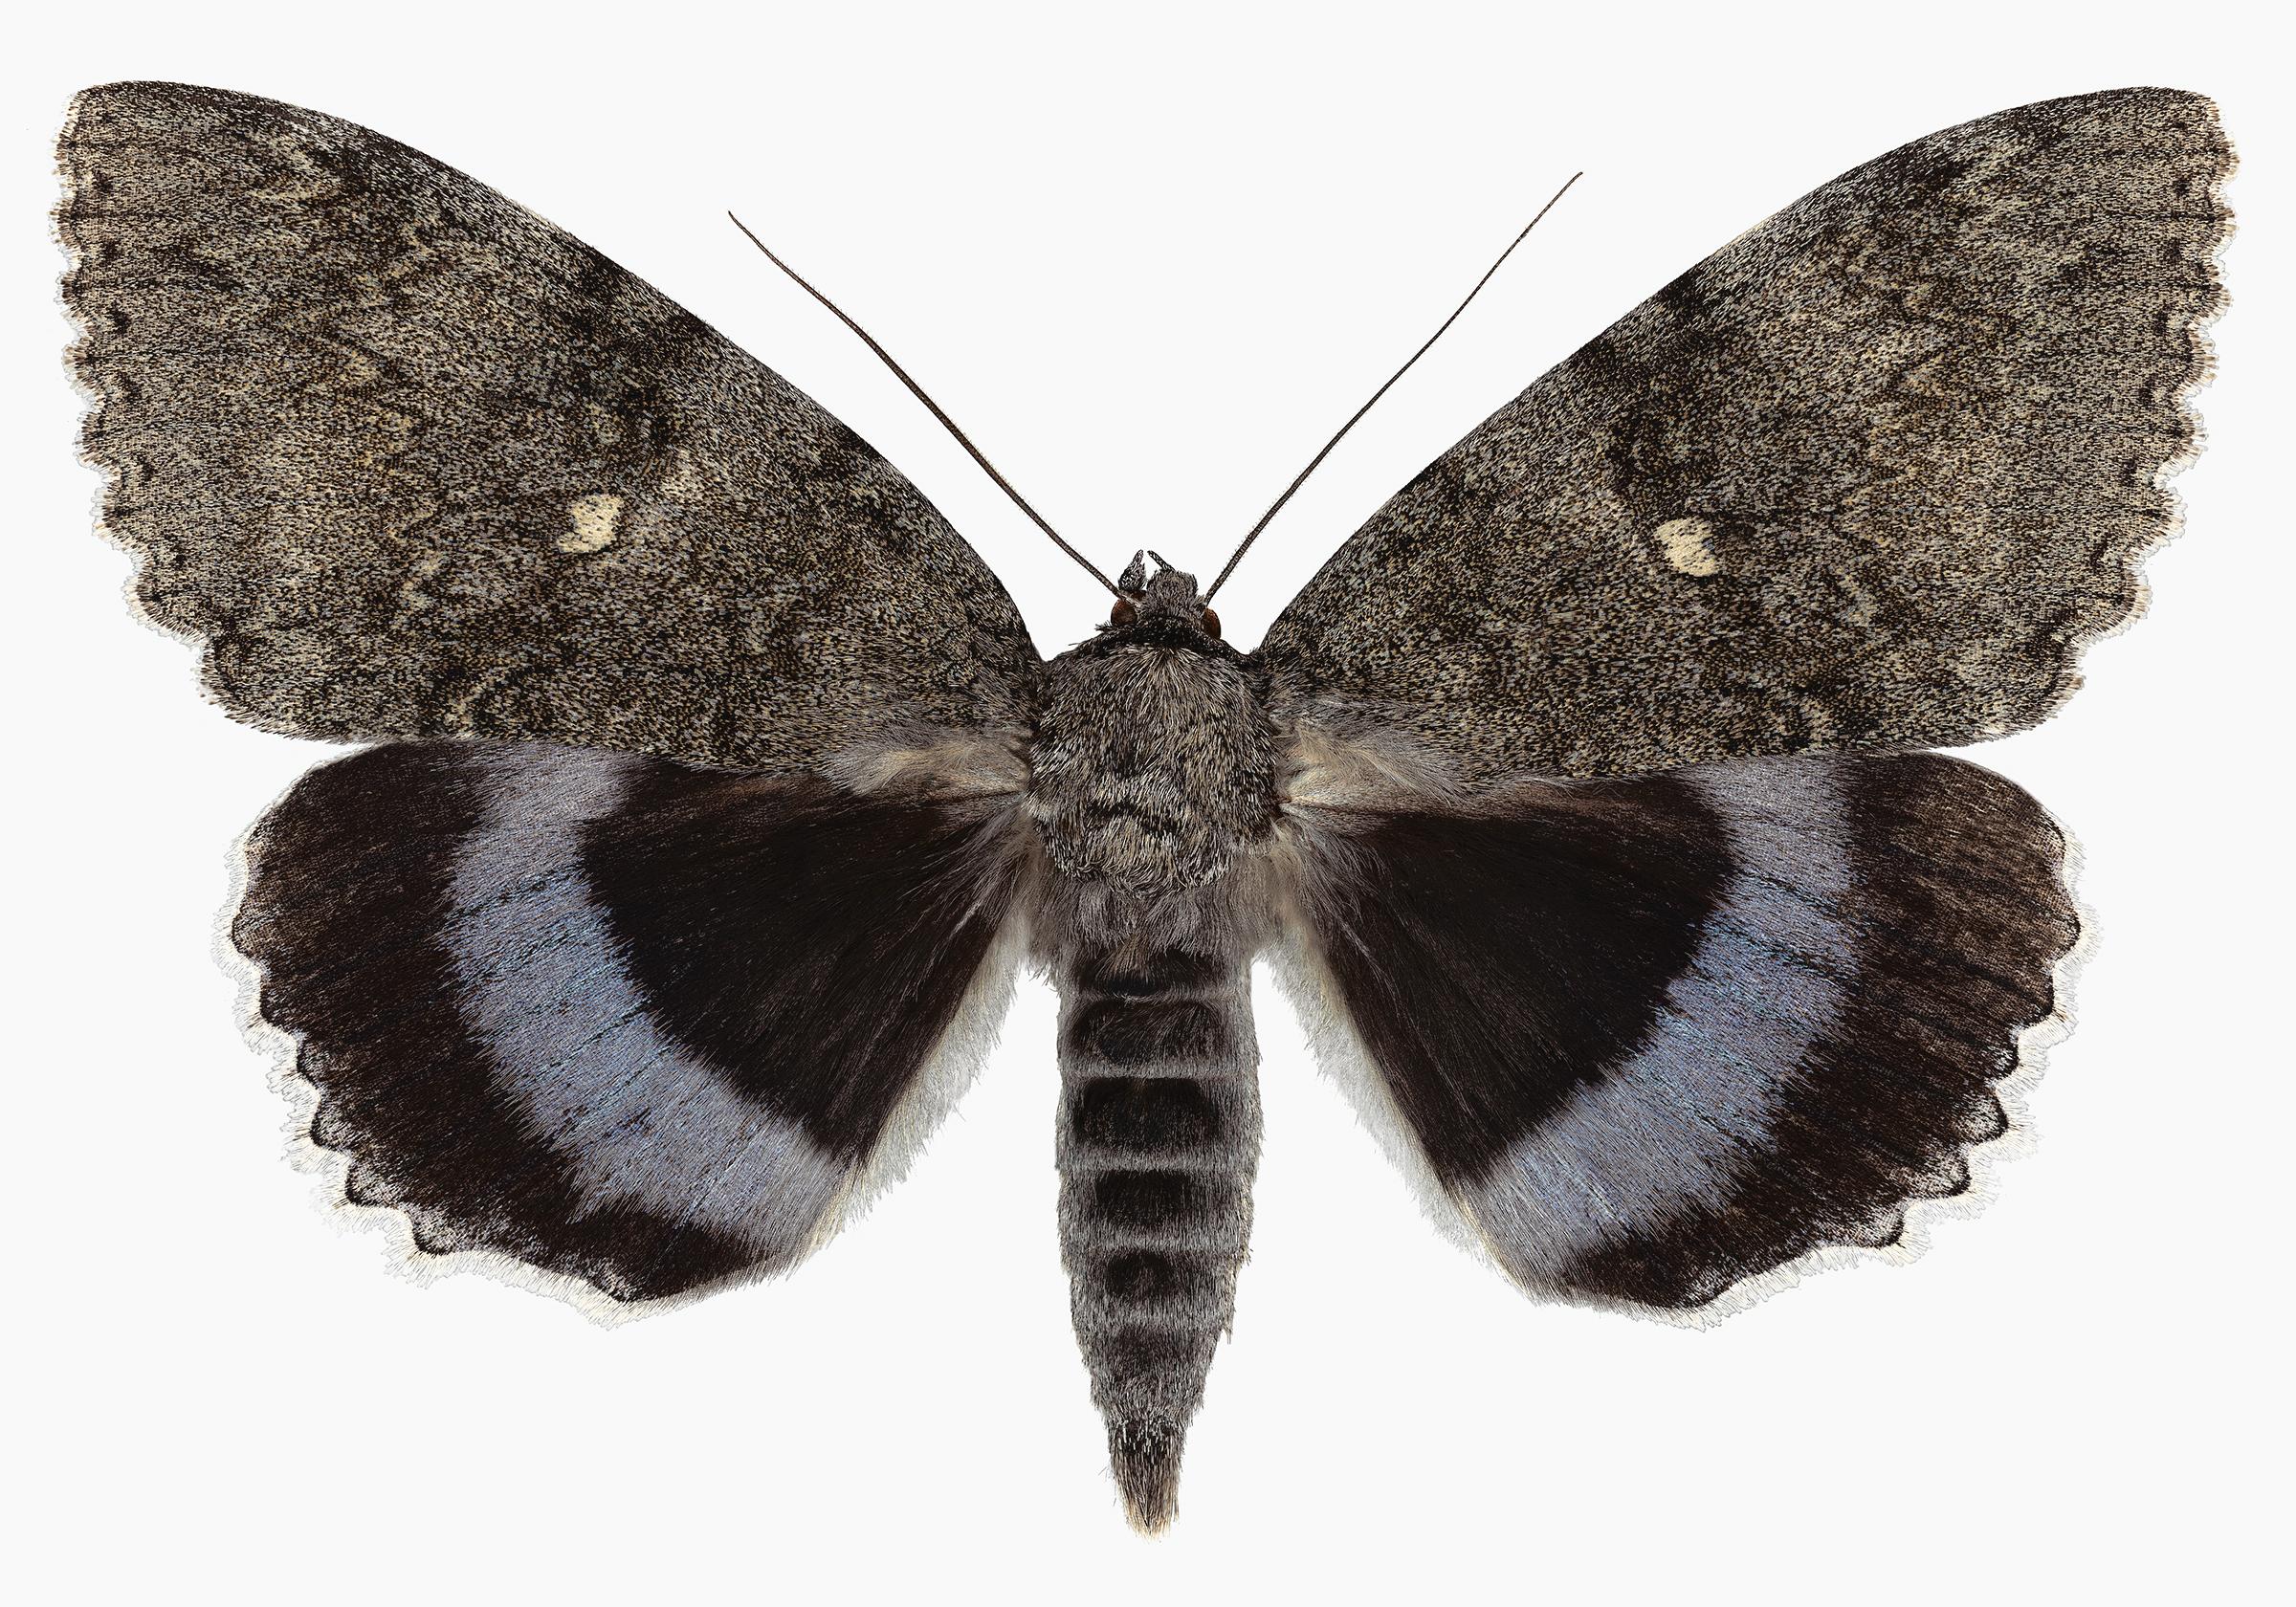 Joseph Scheer Color Photograph - Catocala Fraxini, Gray, Brown Moth on White, Winged Insect Nature Photograph